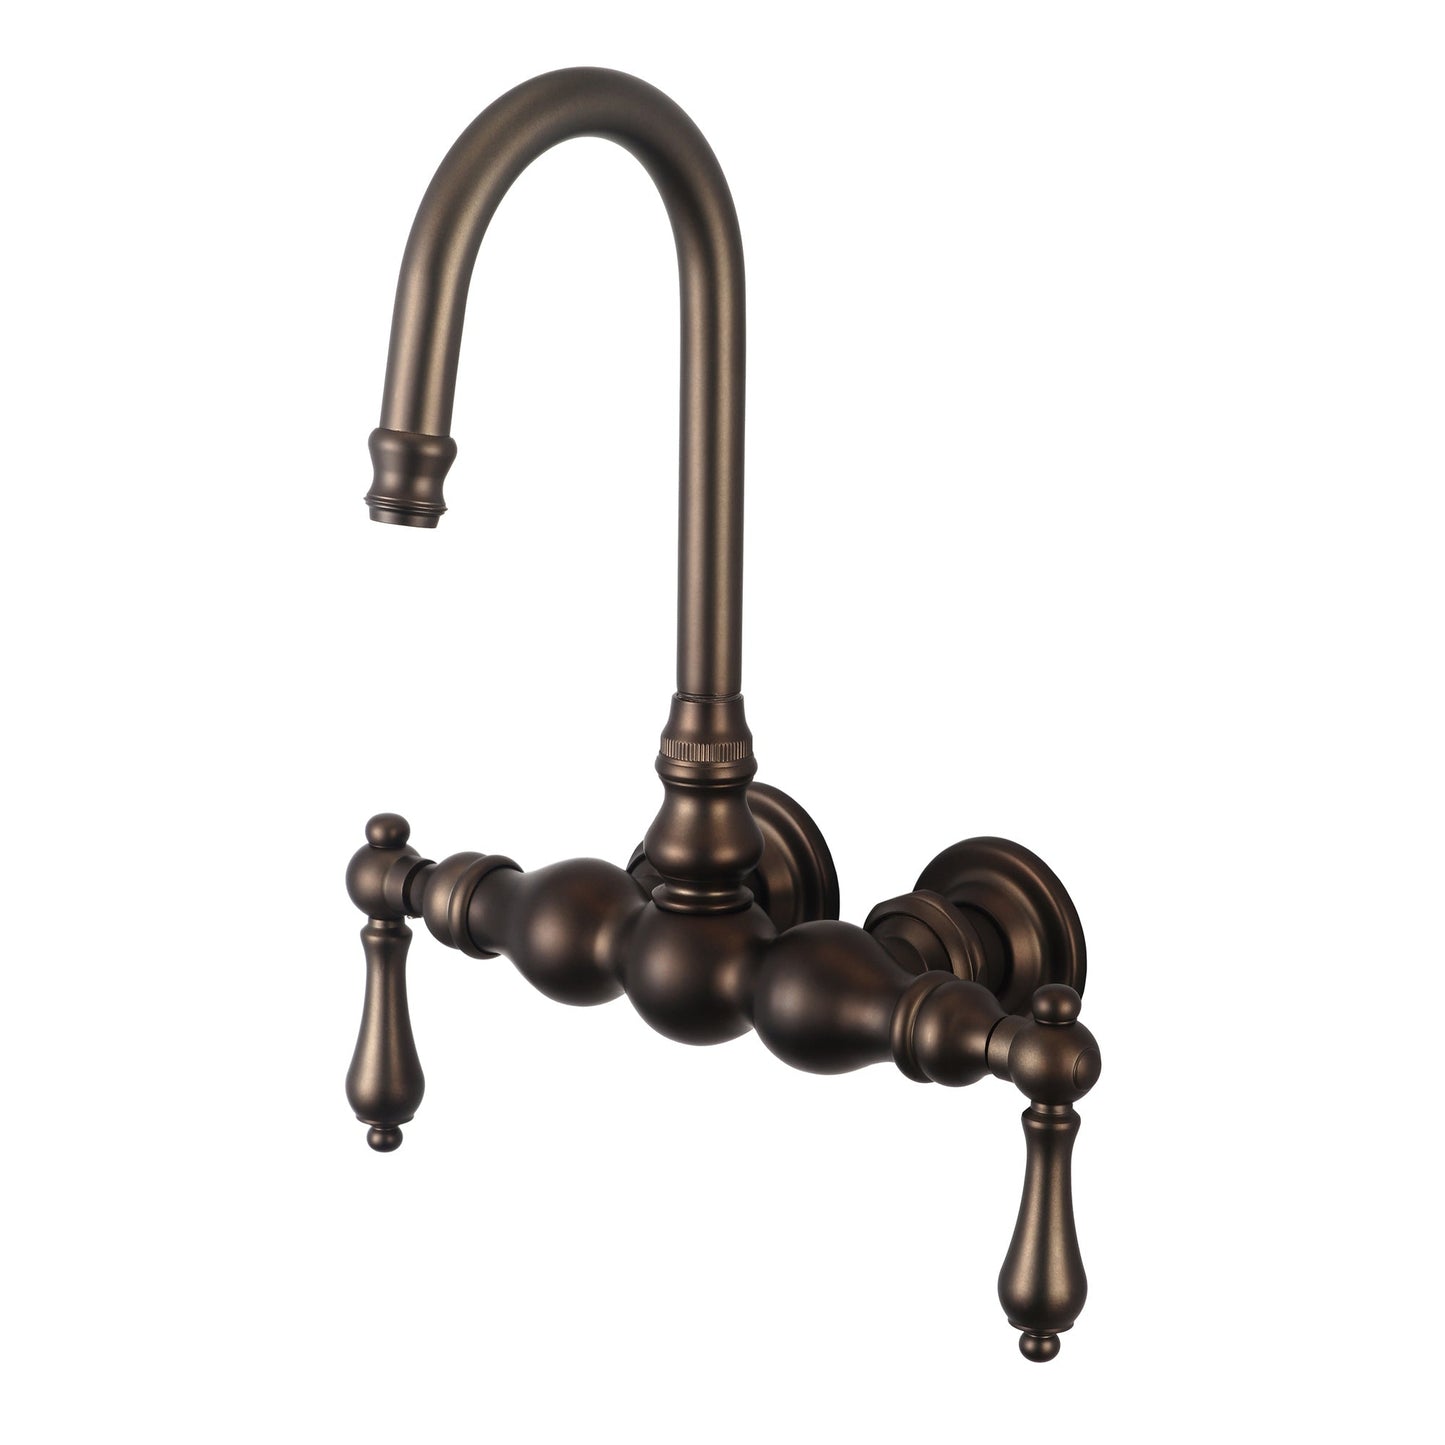 Water Creation Vintage Classic Center Wall Mount Tub F6-0014 9.25" Brown Solid Brass Faucet With Gooseneck Spout And Straight Wall Connector And Metal Lever Handles Without Labels